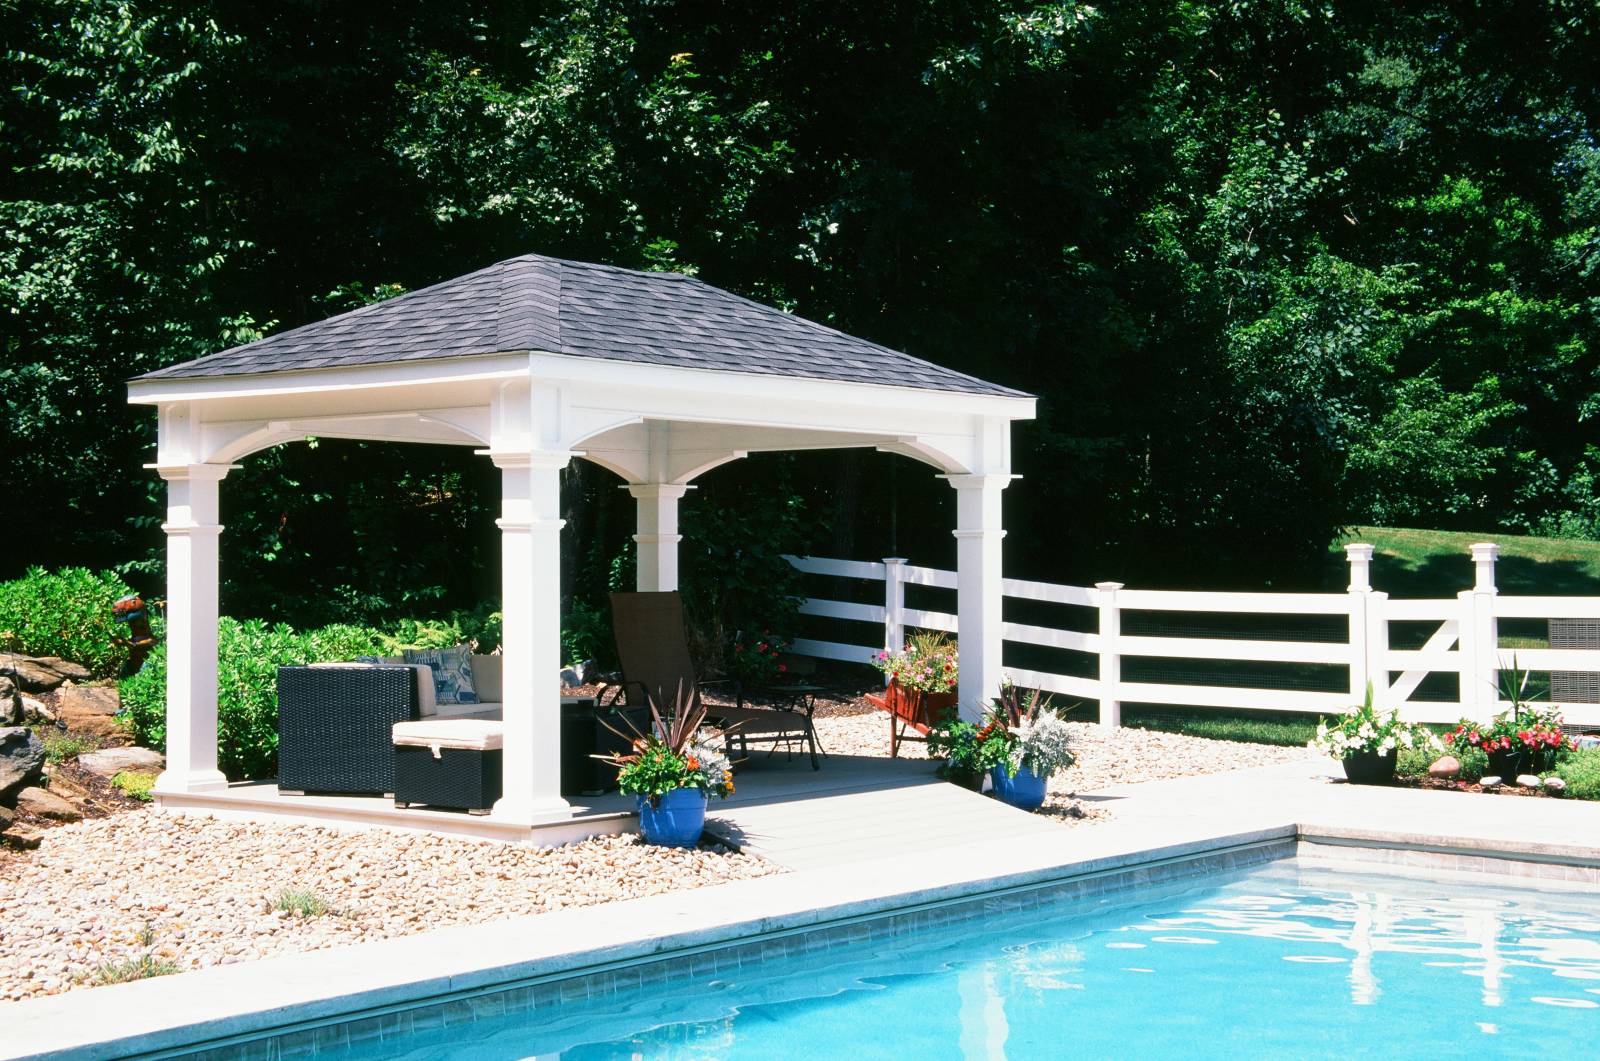 10' x 14' Ridgefield Pavilion Shown with Options